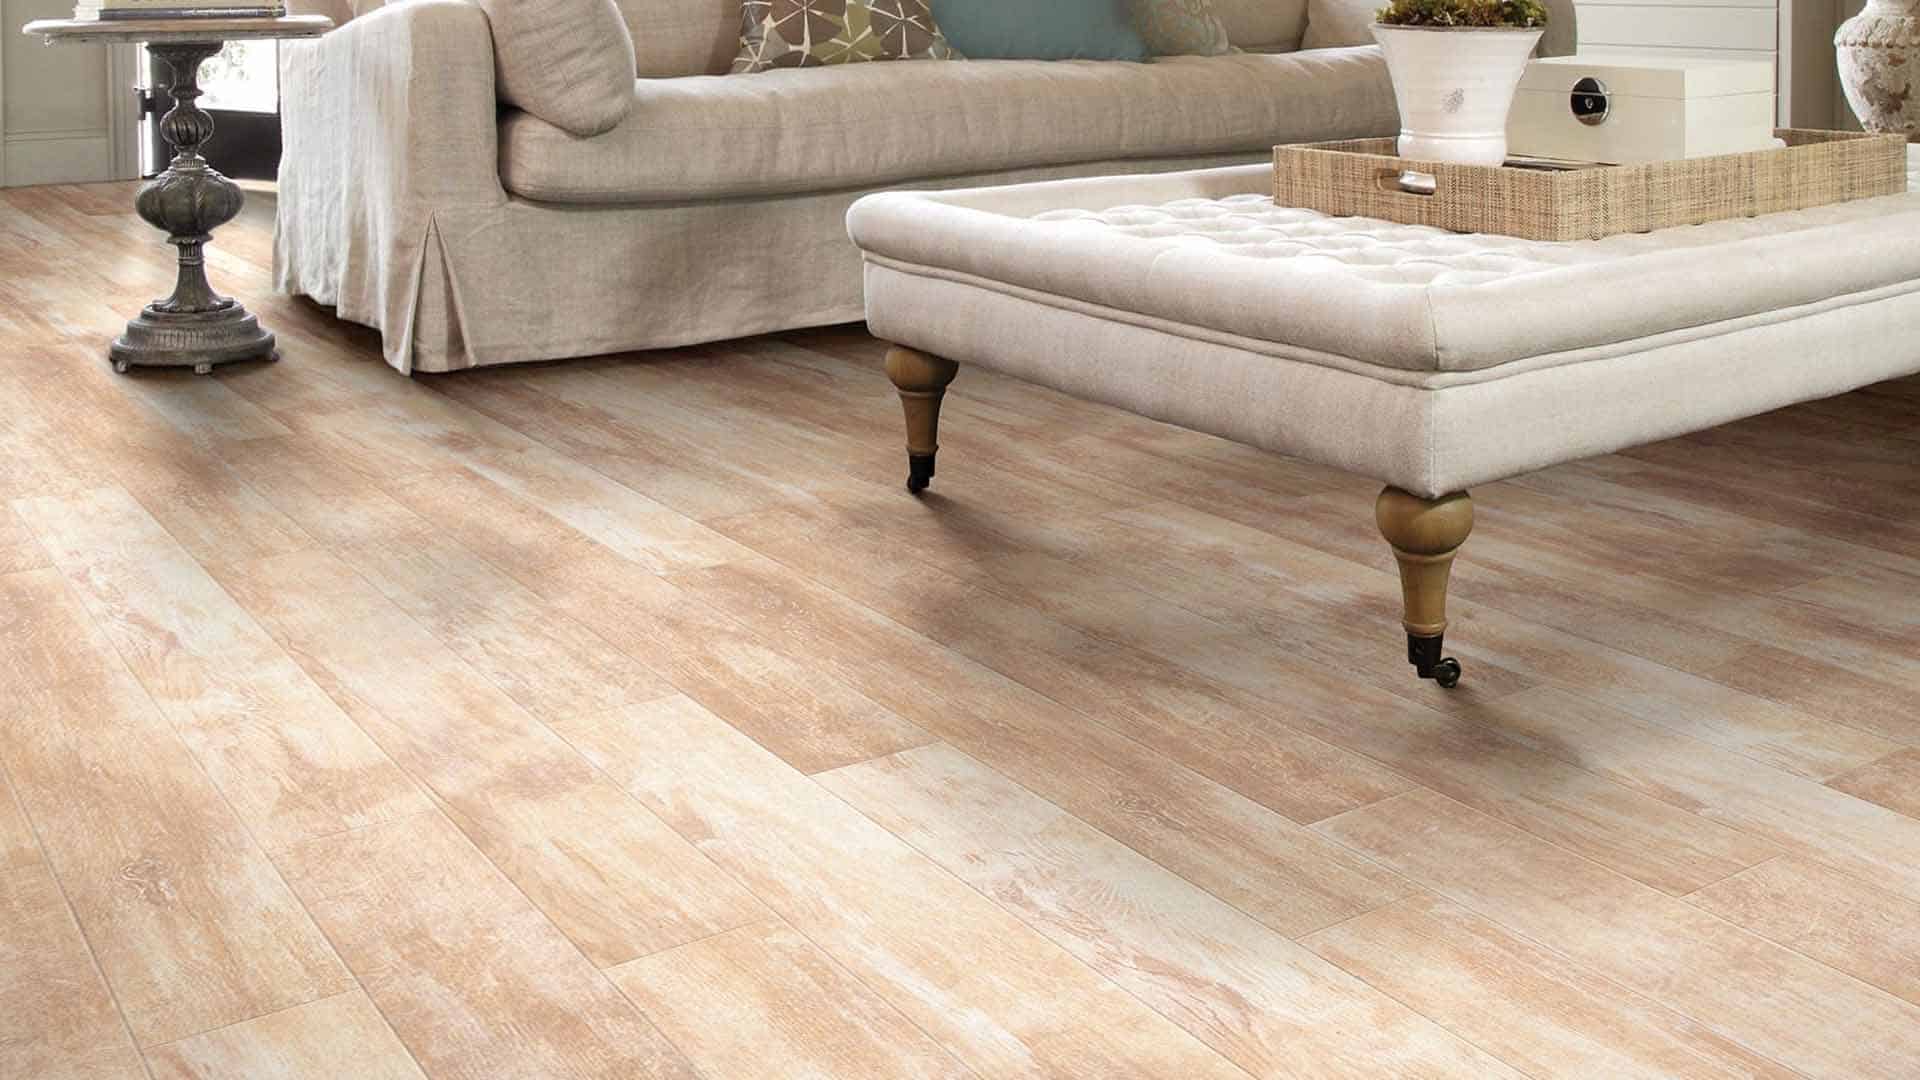 What is Laminate Flooring? And Is Laminate Right For You?